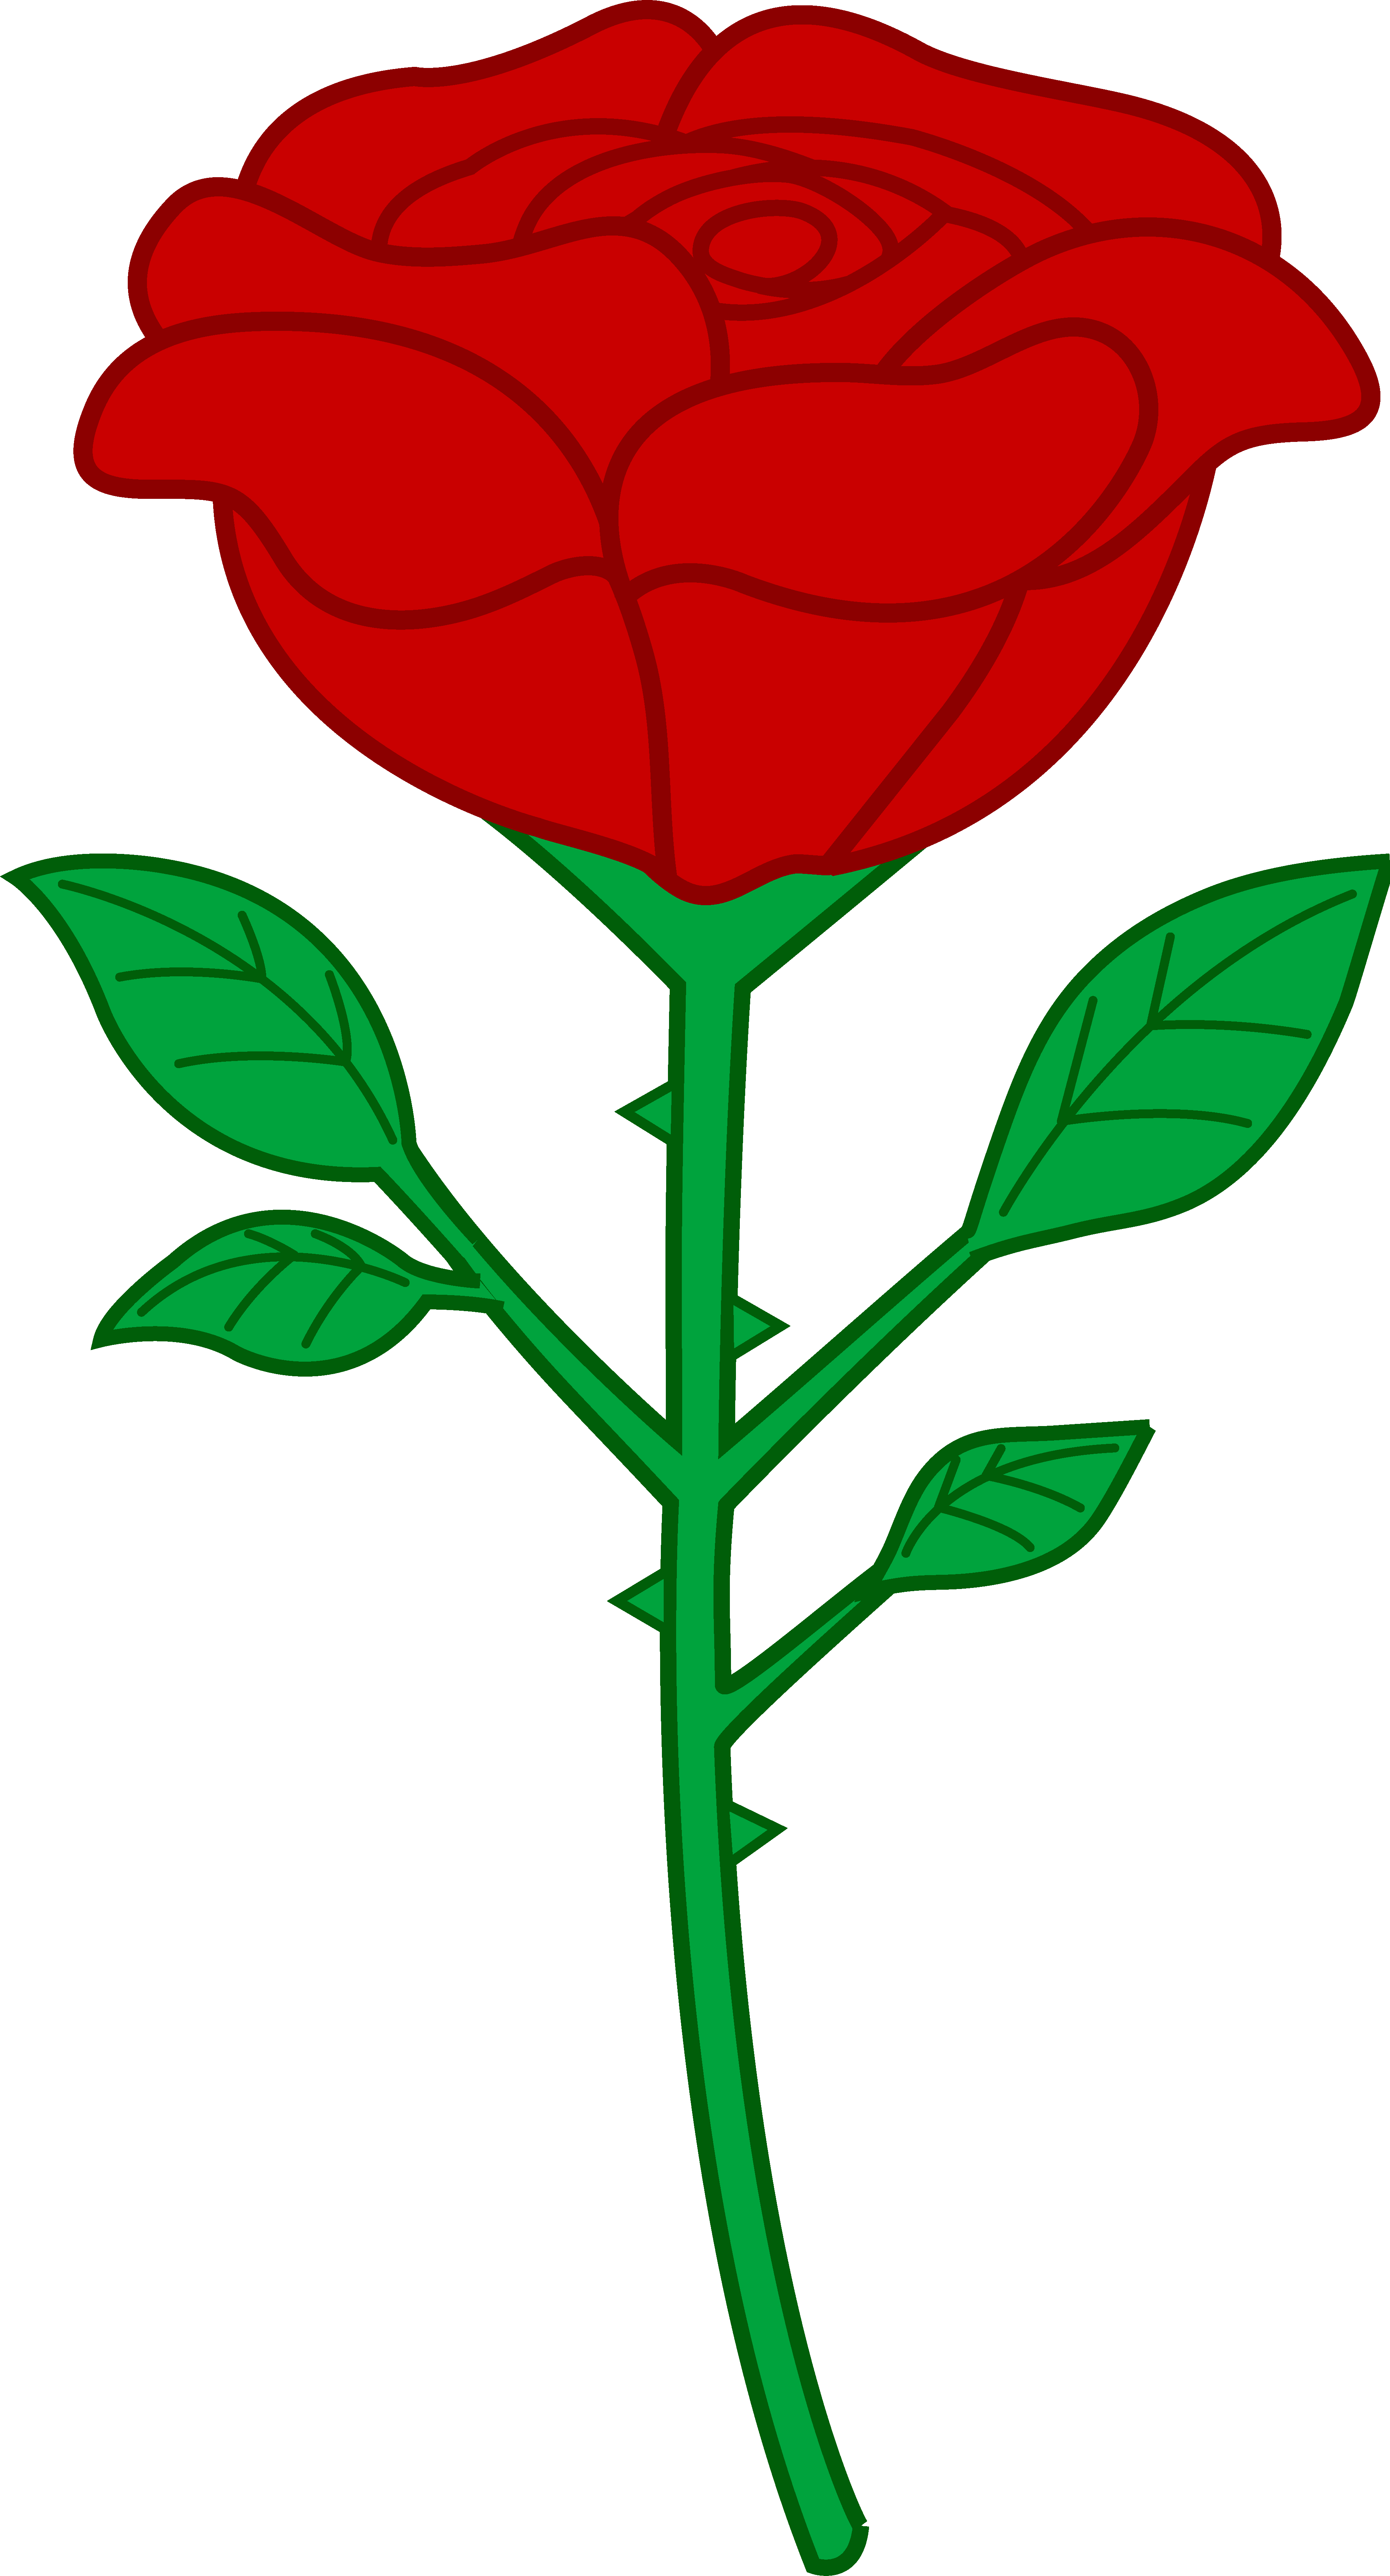 Rose images clipart